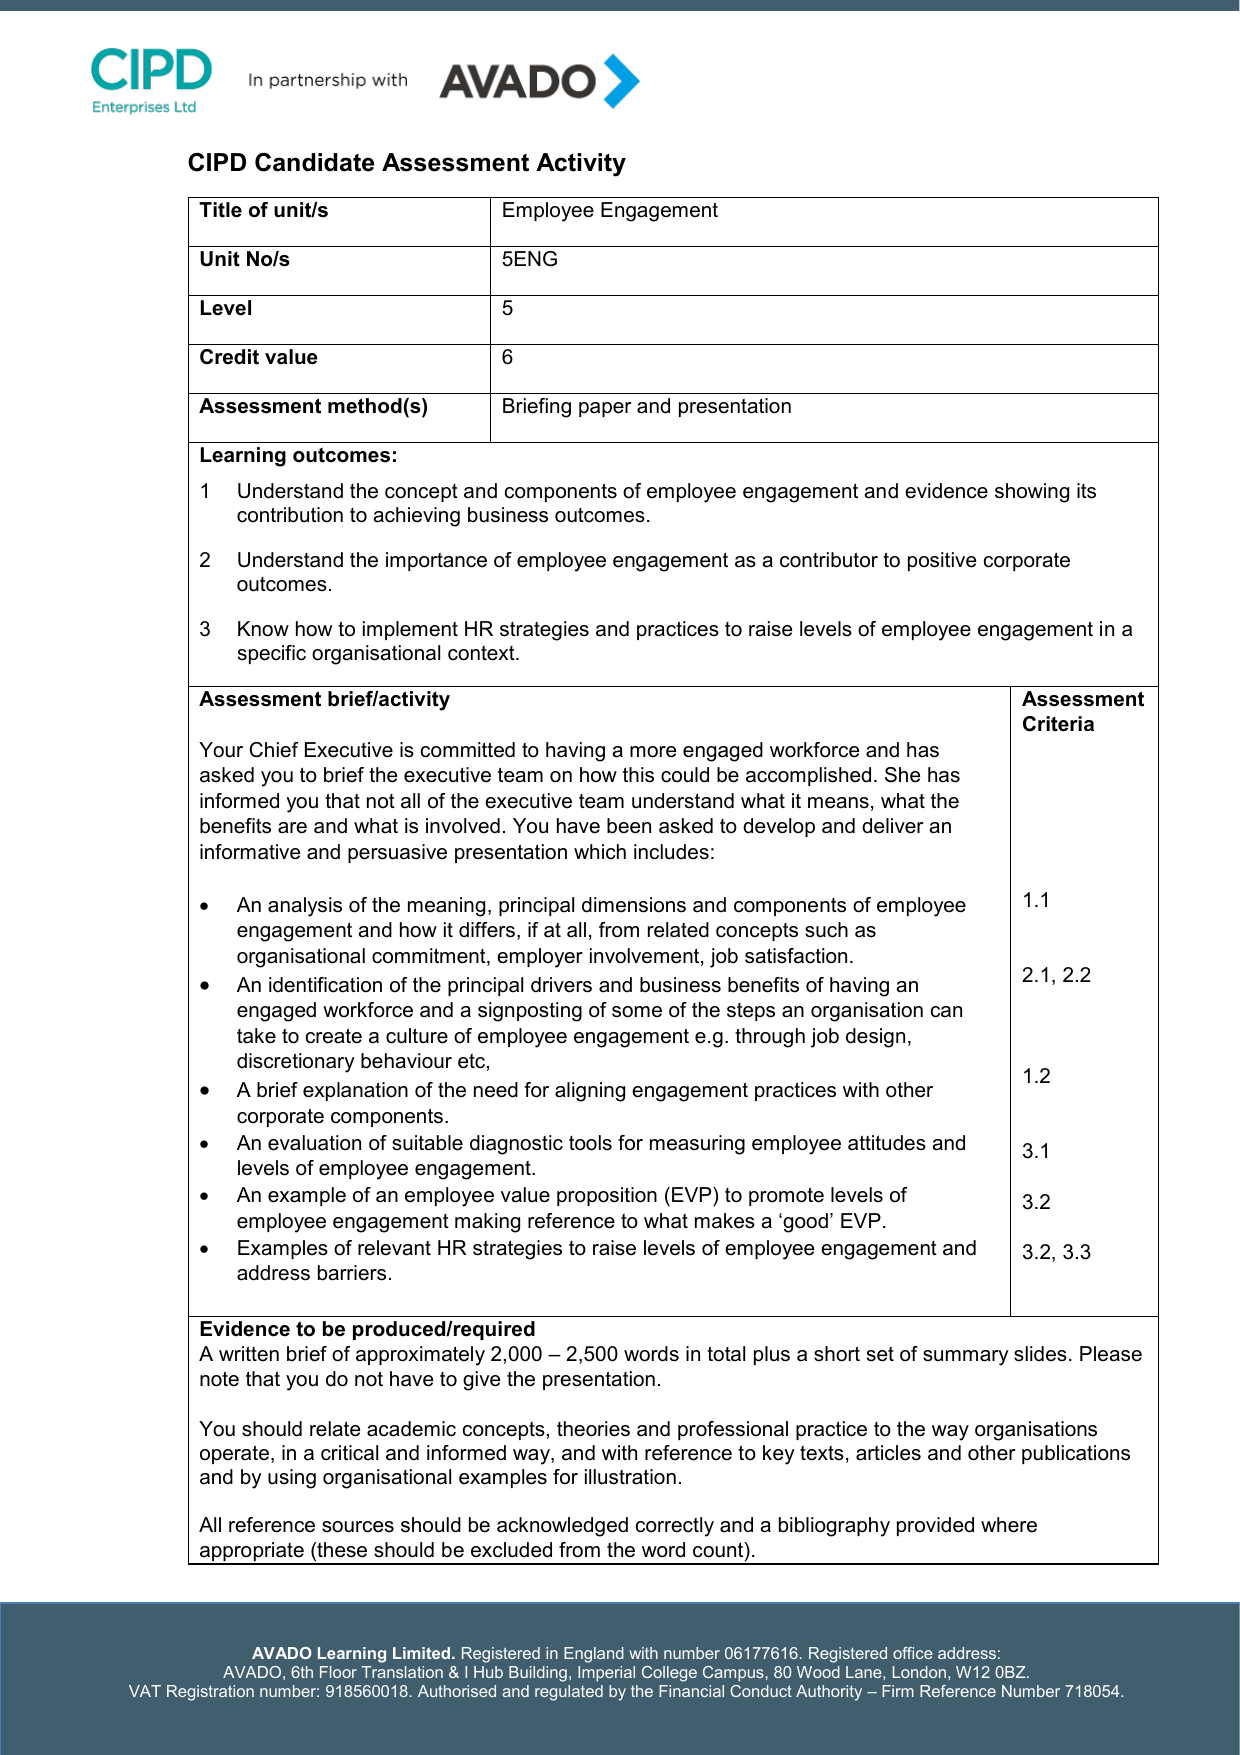 employment law assignment cipd level 5